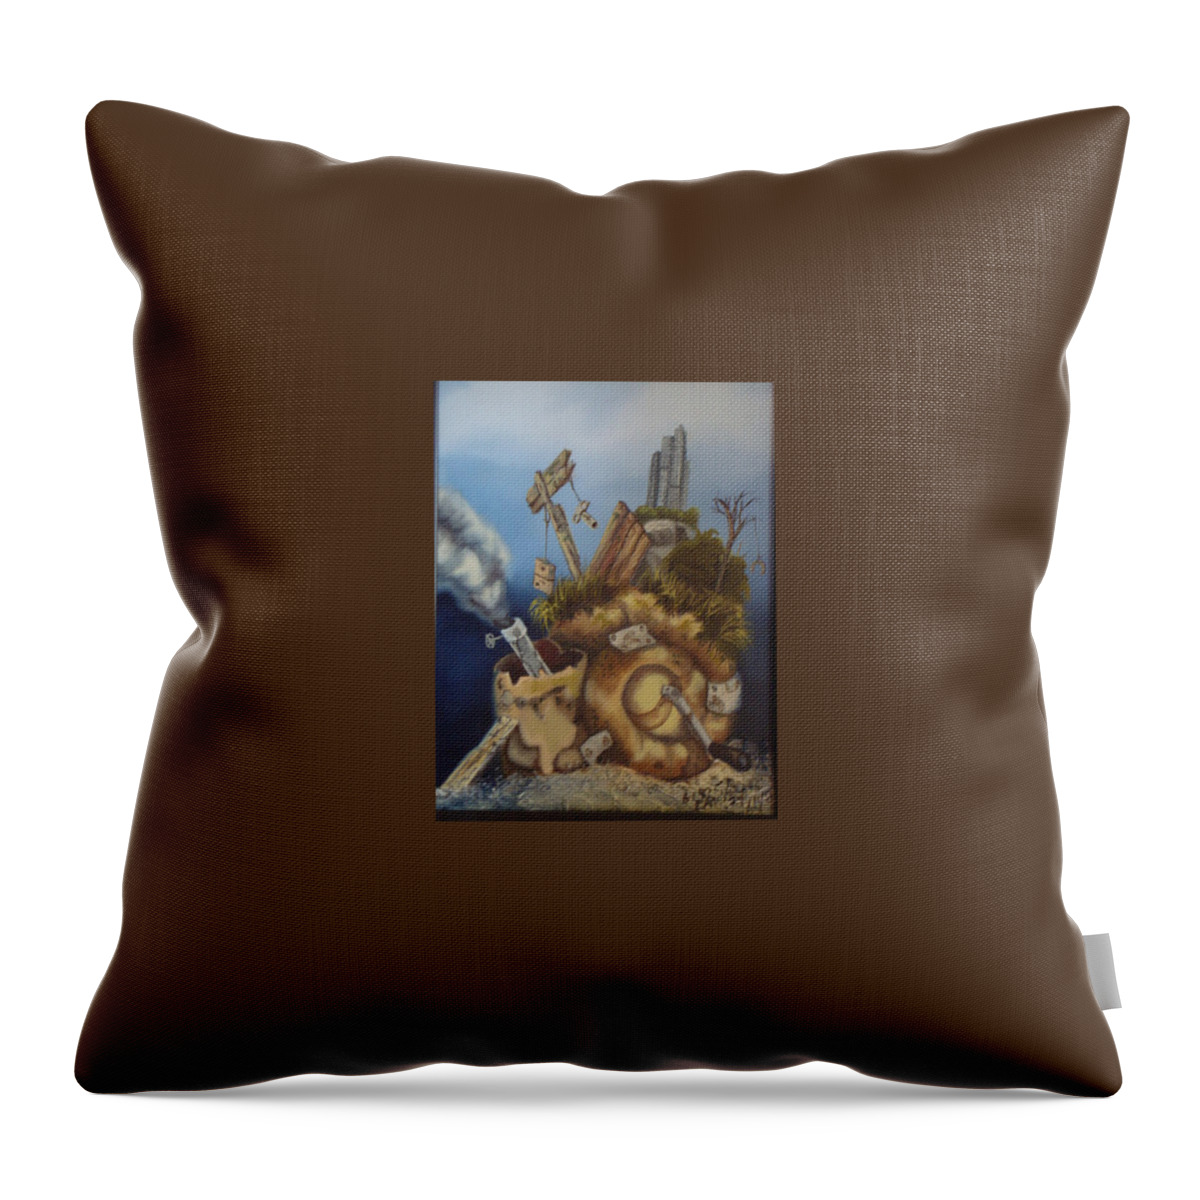 Snail Throw Pillow featuring the painting Prohibido Vivir by Carlos Rodriguez